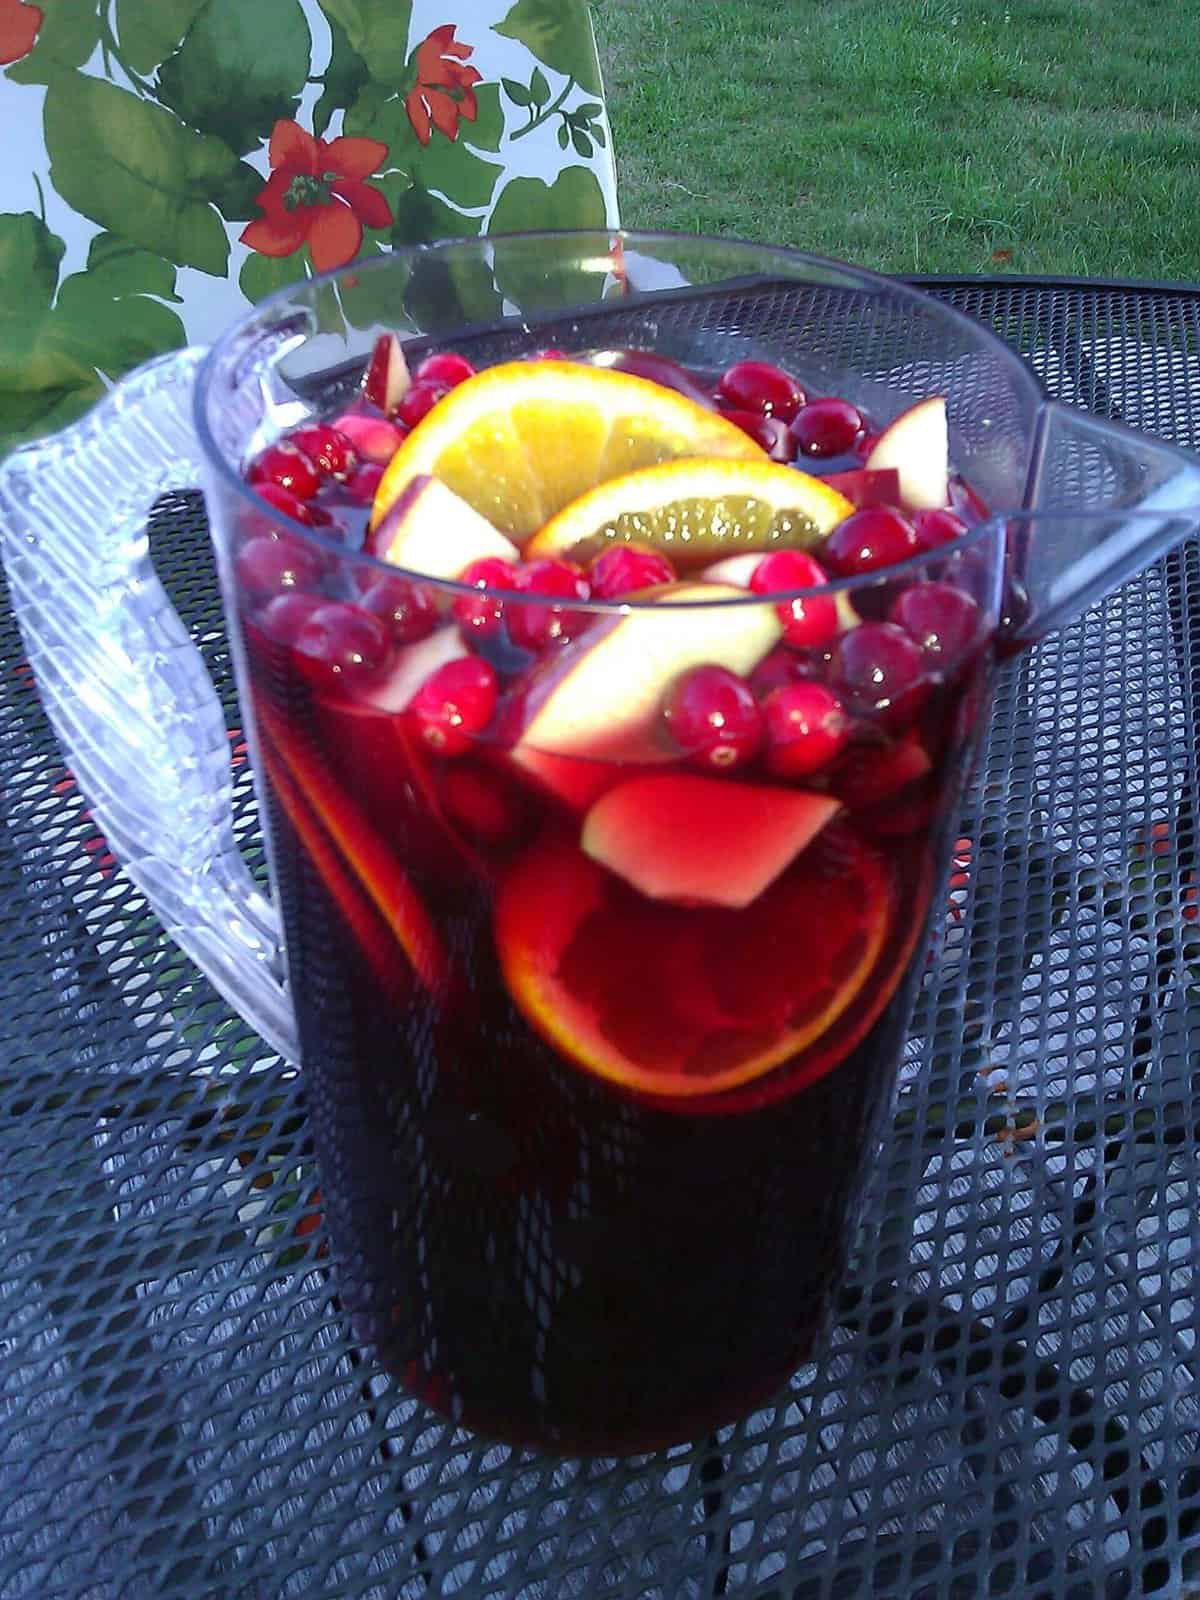  Red wine, cranberry juice, and a splash of orange liqueur create a deliciously complex flavor.